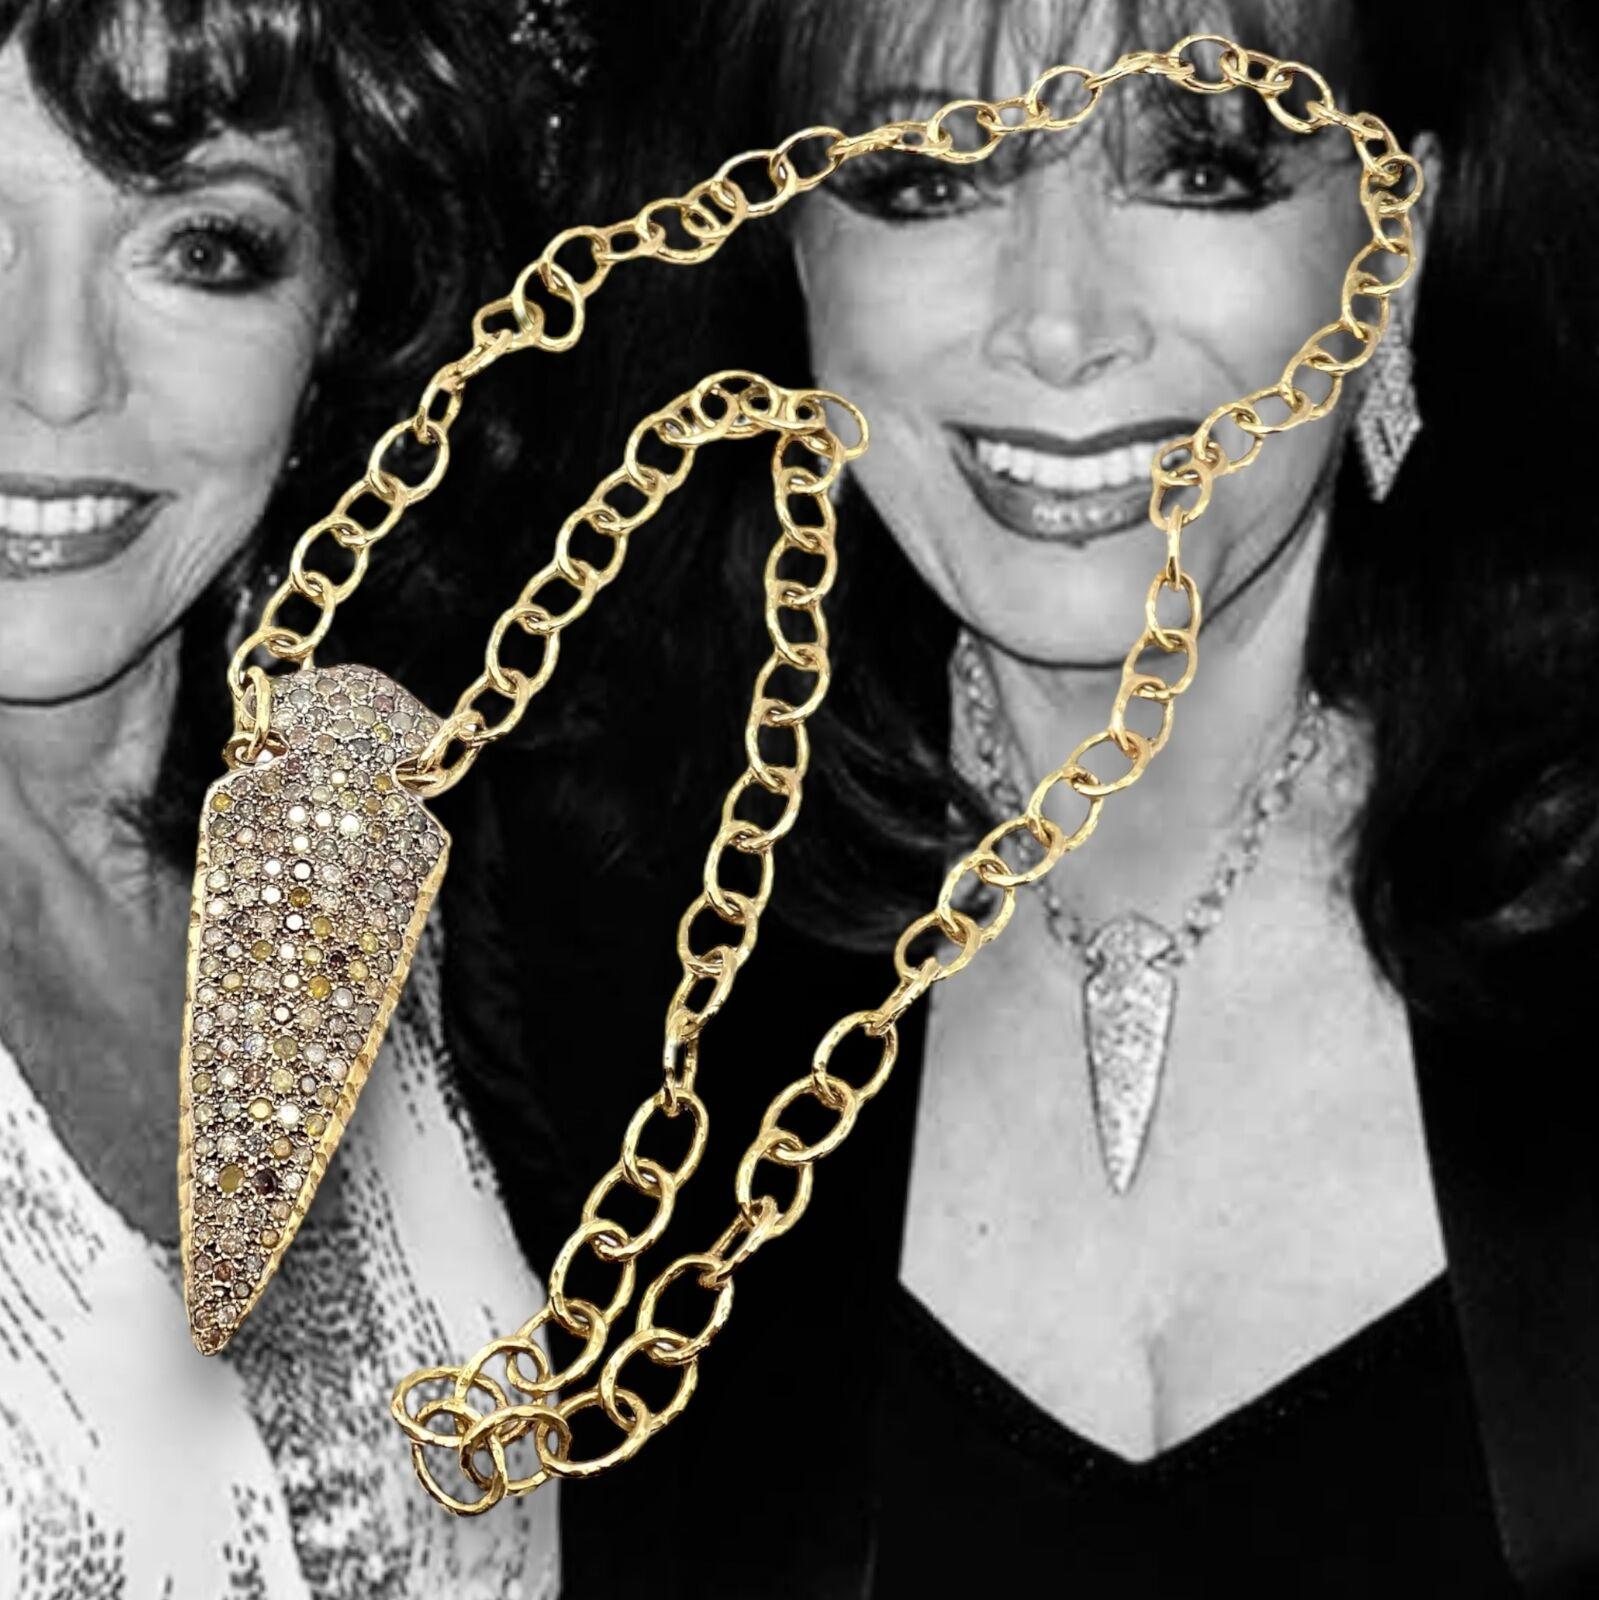 18k Yellow Gold Color Diamond Large Arrowhead Pendant Necklace by Loree Rodkin. 
With Round color diamonds estimated total diamond weight 6.50cts
This necklace used to belong to Jackie Collins and was purchased from her jewelry estate